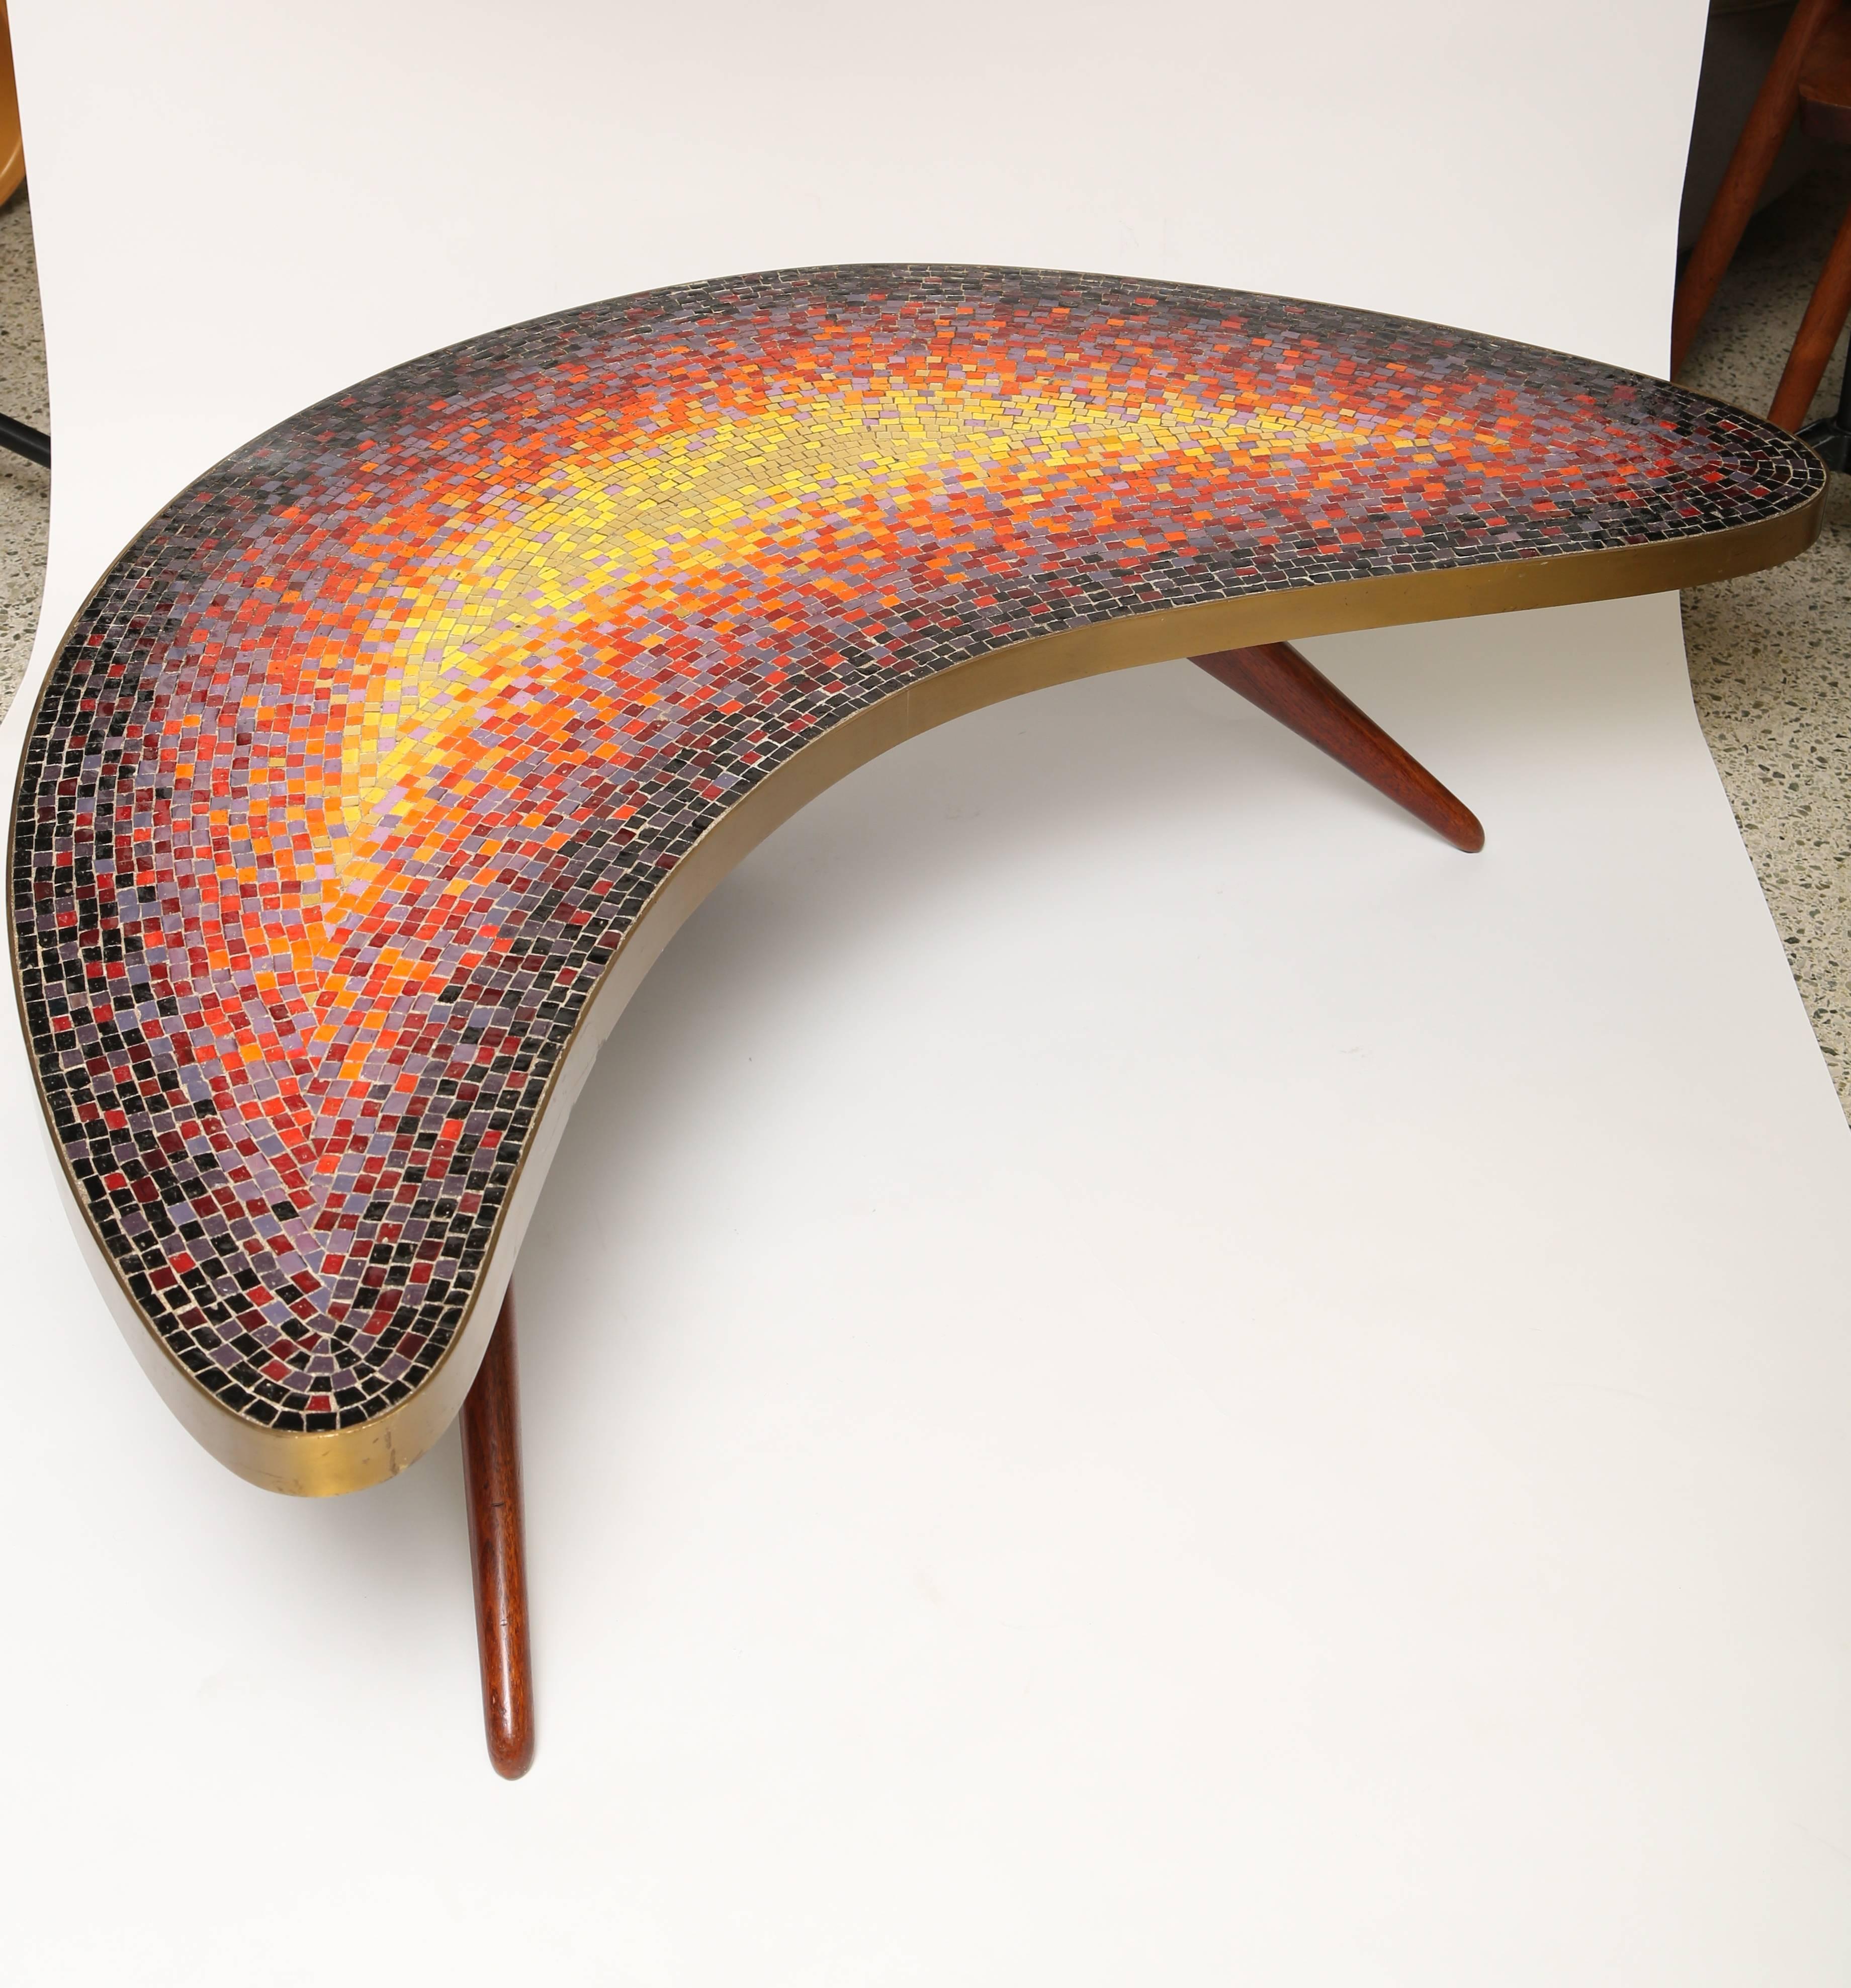 A rare example of the Venetian Mosaic glass boomerang table.
An identical table is pictured in the complete Kagan Book, 2004
Branded below- Kagan Dreyfuss New York.